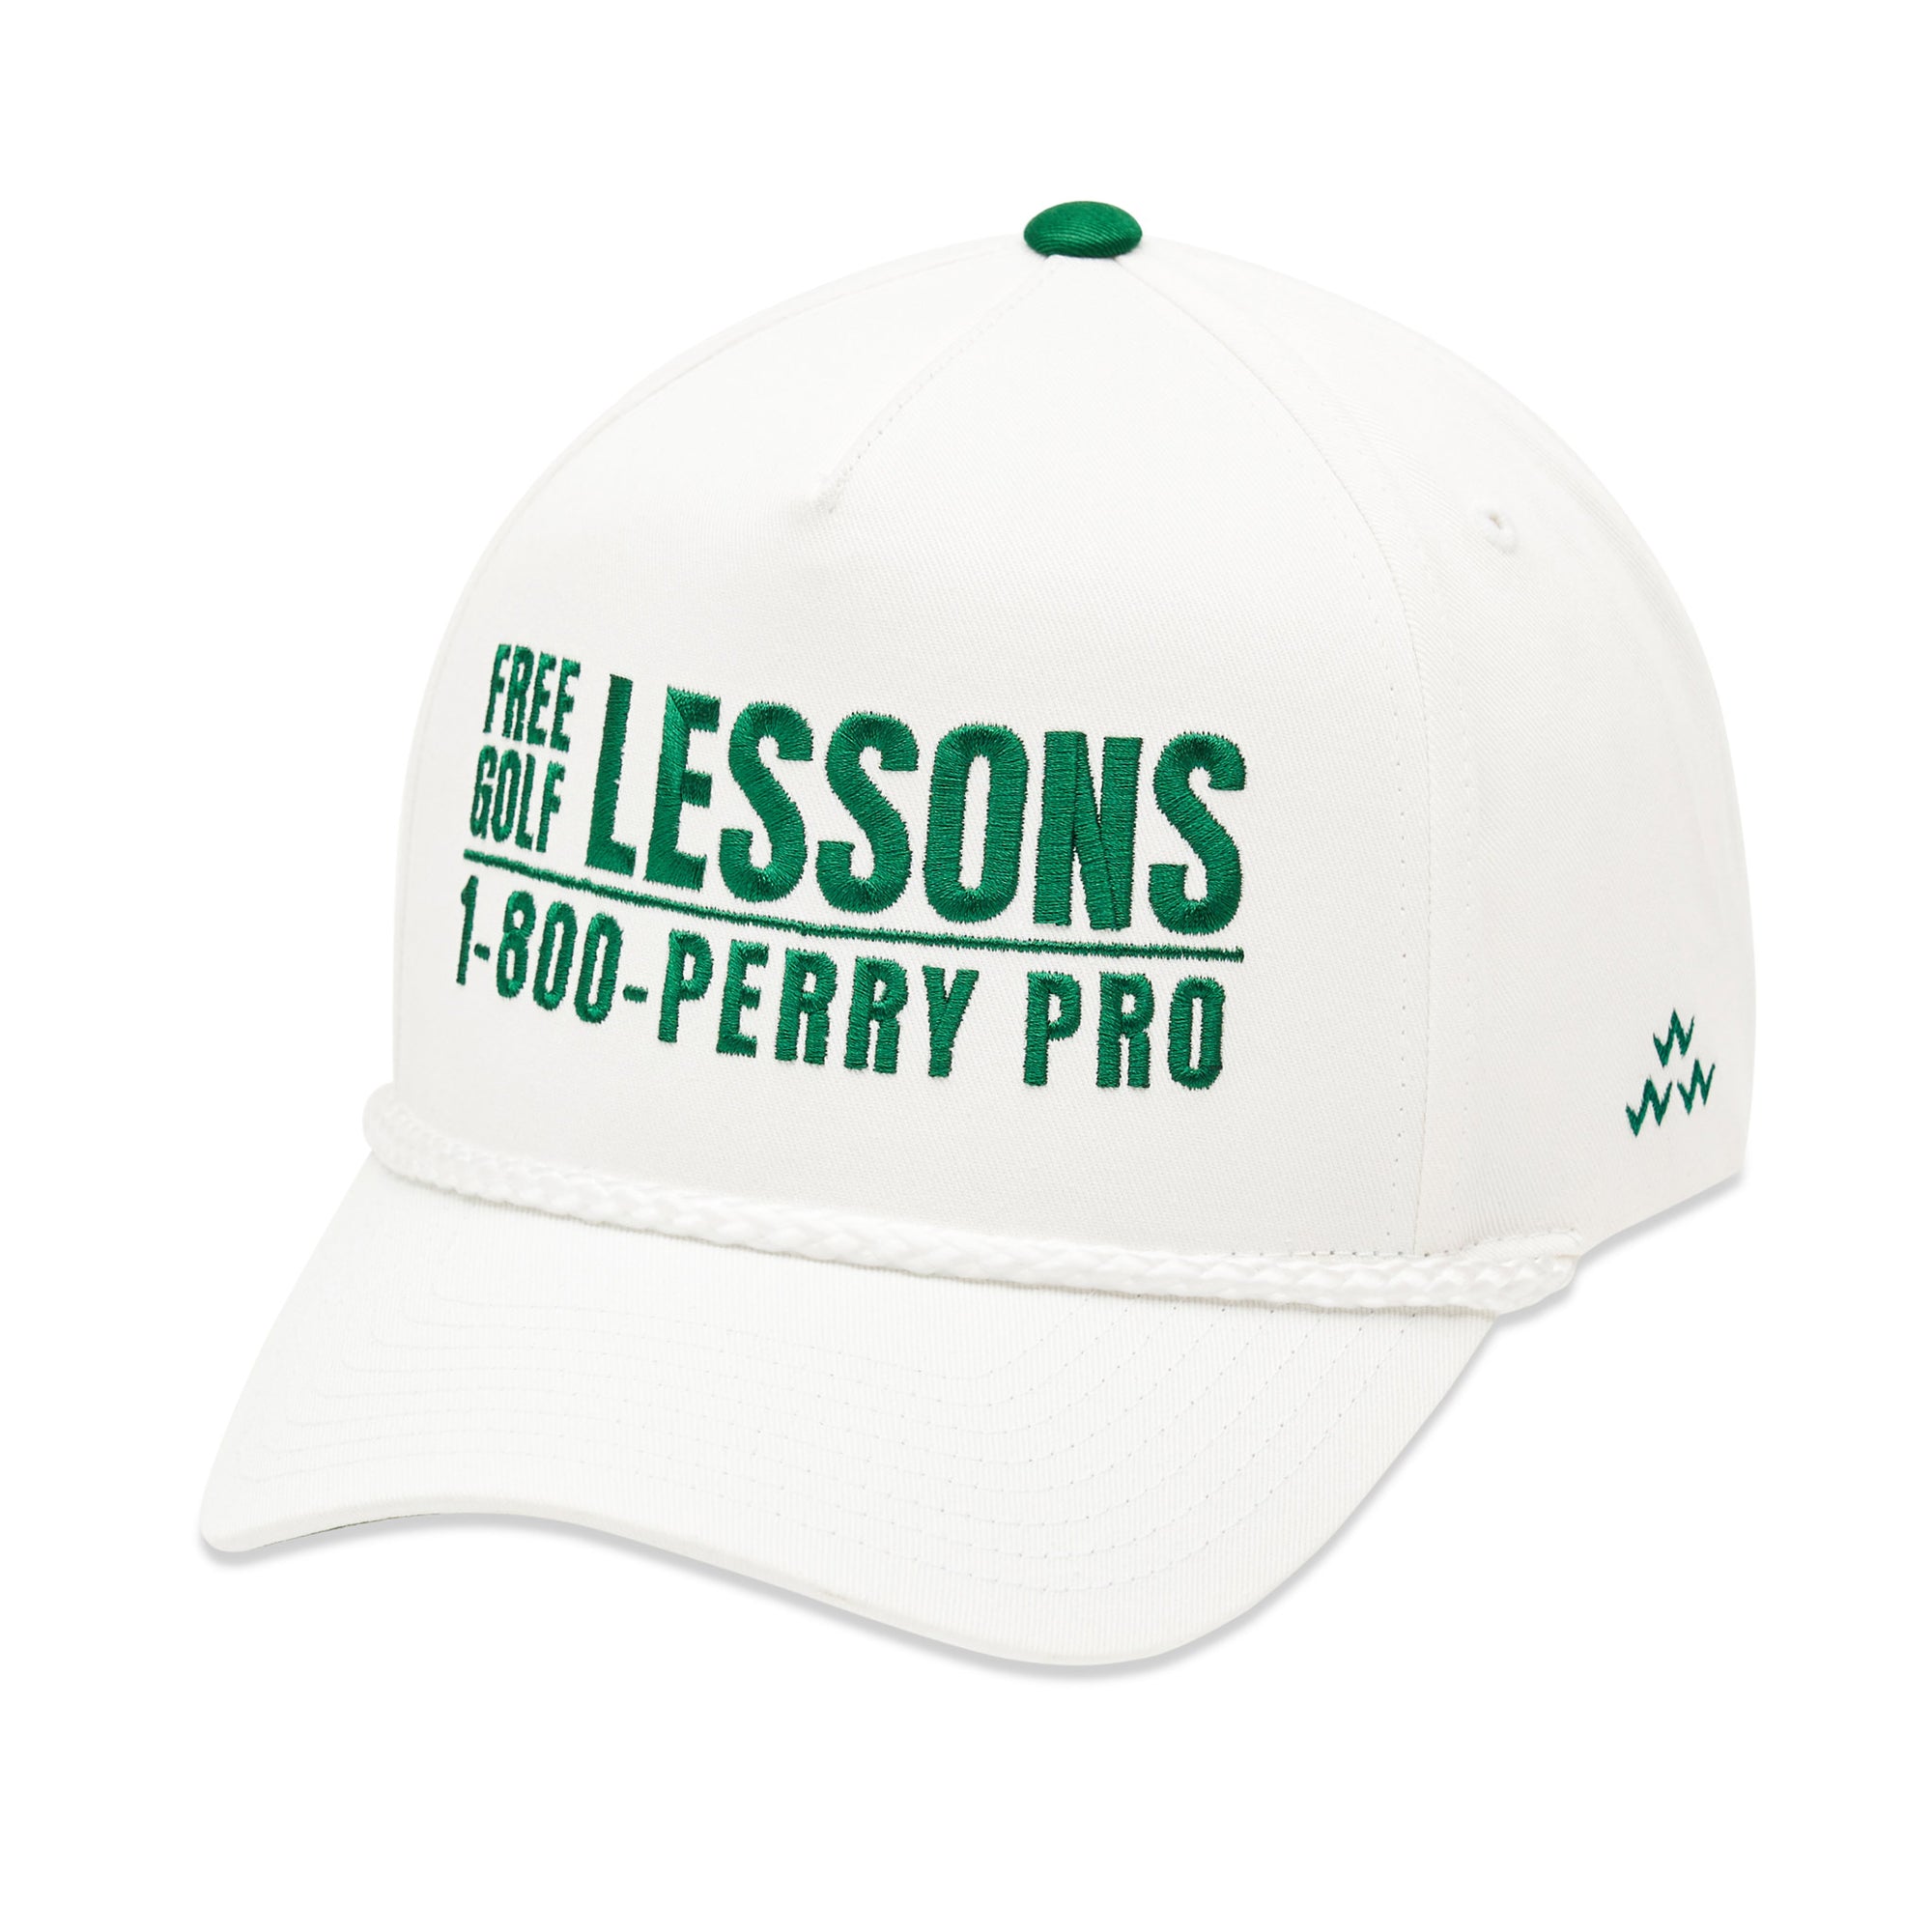 birds-of-condor-white-perry-pro-golf-lessons-snapback-a-frame-hat-front